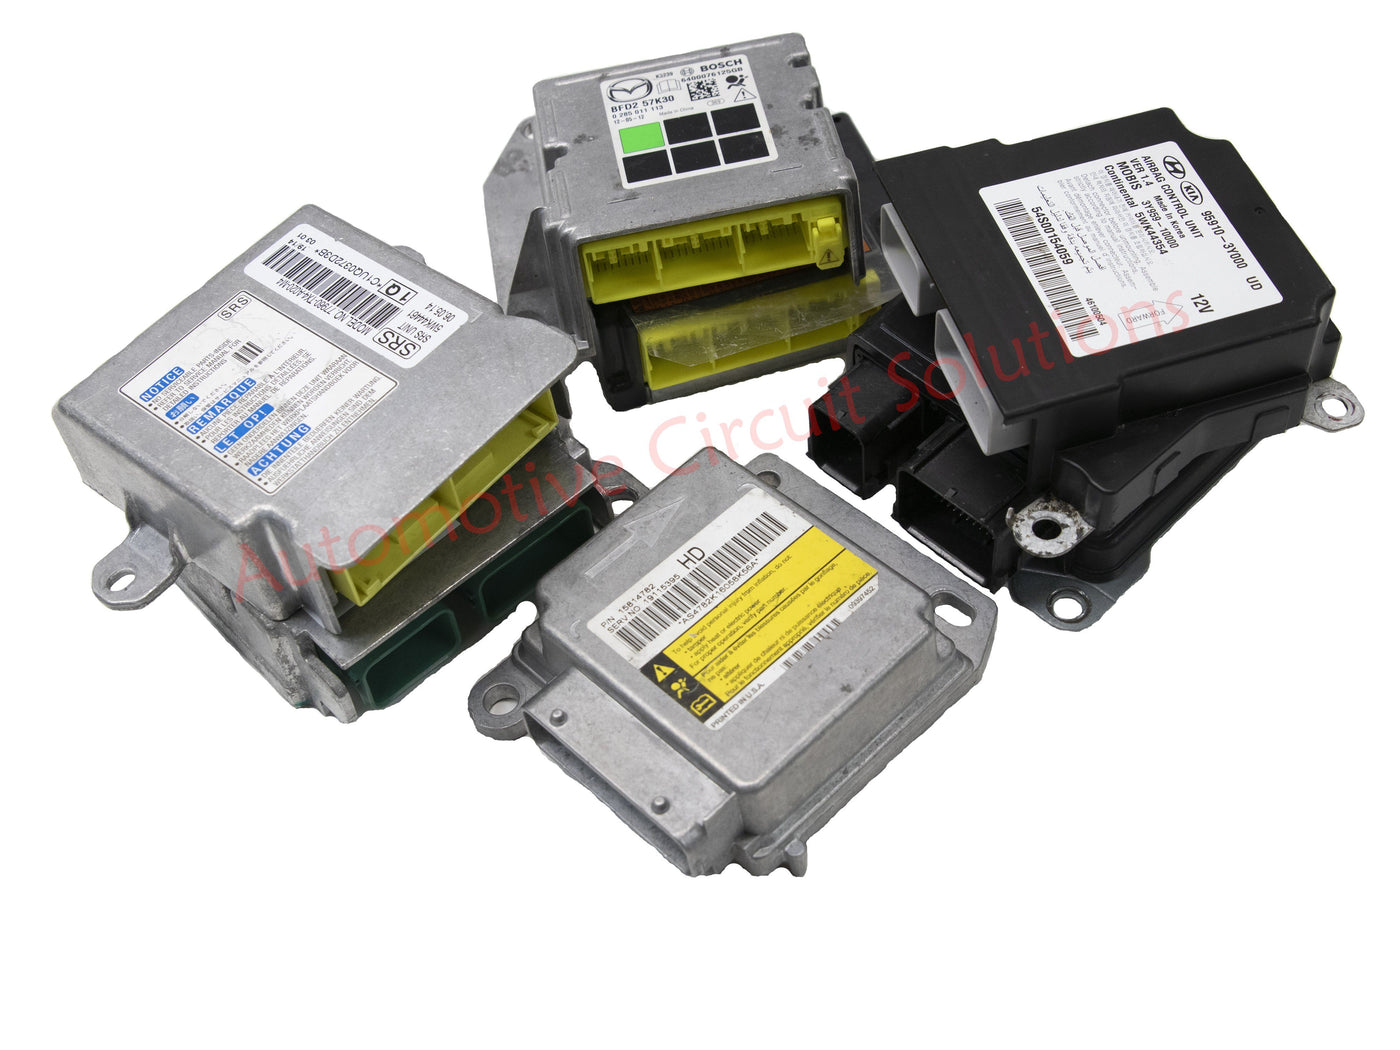 Toyota SRS AIRBAG CONTROL MODULE RESET SERVICE | 24Hour Turnaround SRS Module Reset Automotive Circuit Solutions 